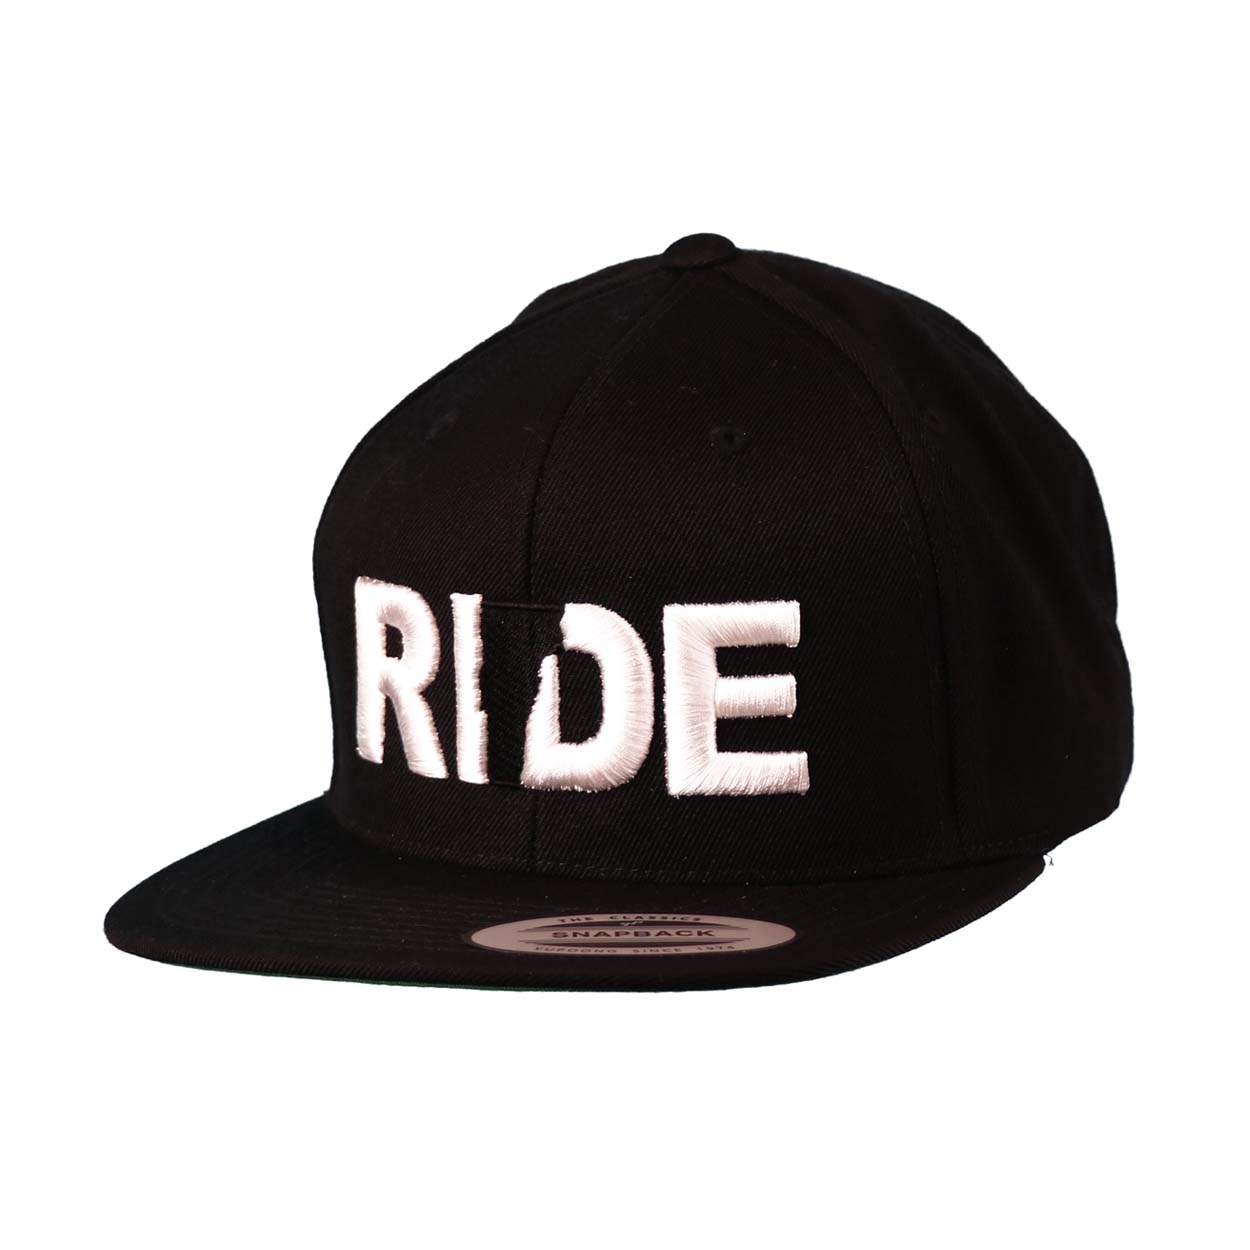 Ride Vermont Classic Pro 3D Puff Embroidered Snapback Flat Brim Hat Black